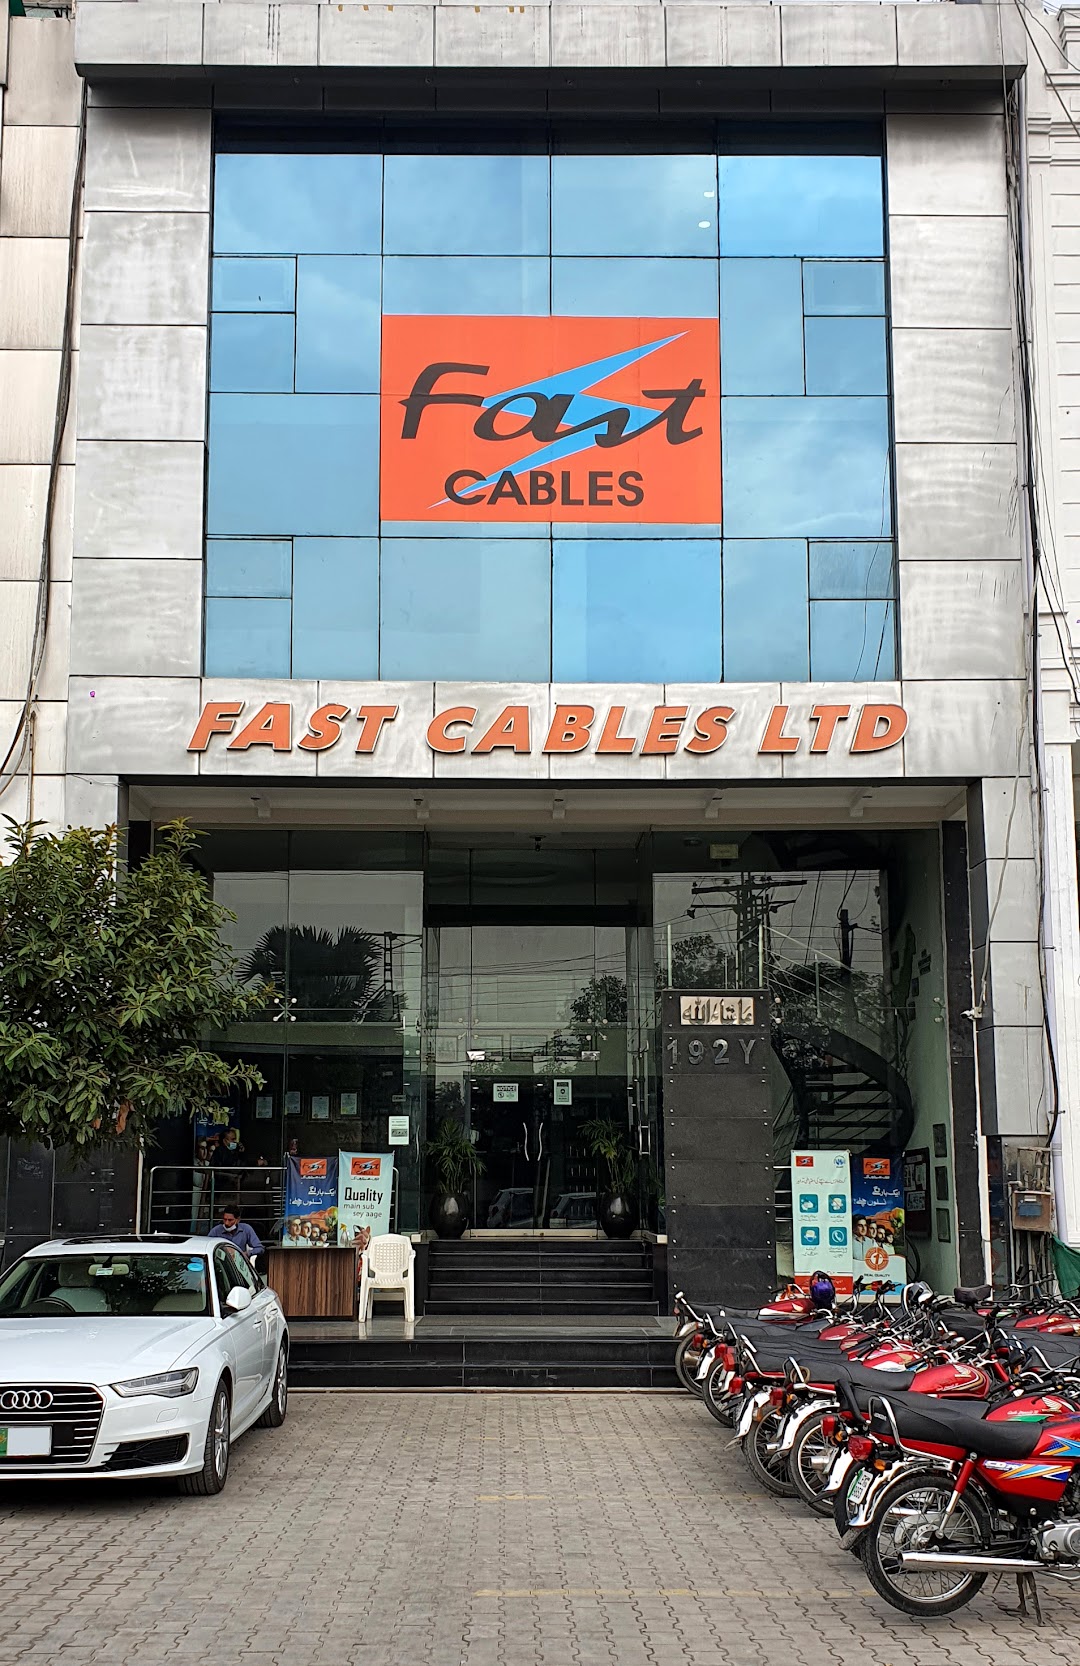 Fast Cables Limited Head Office.